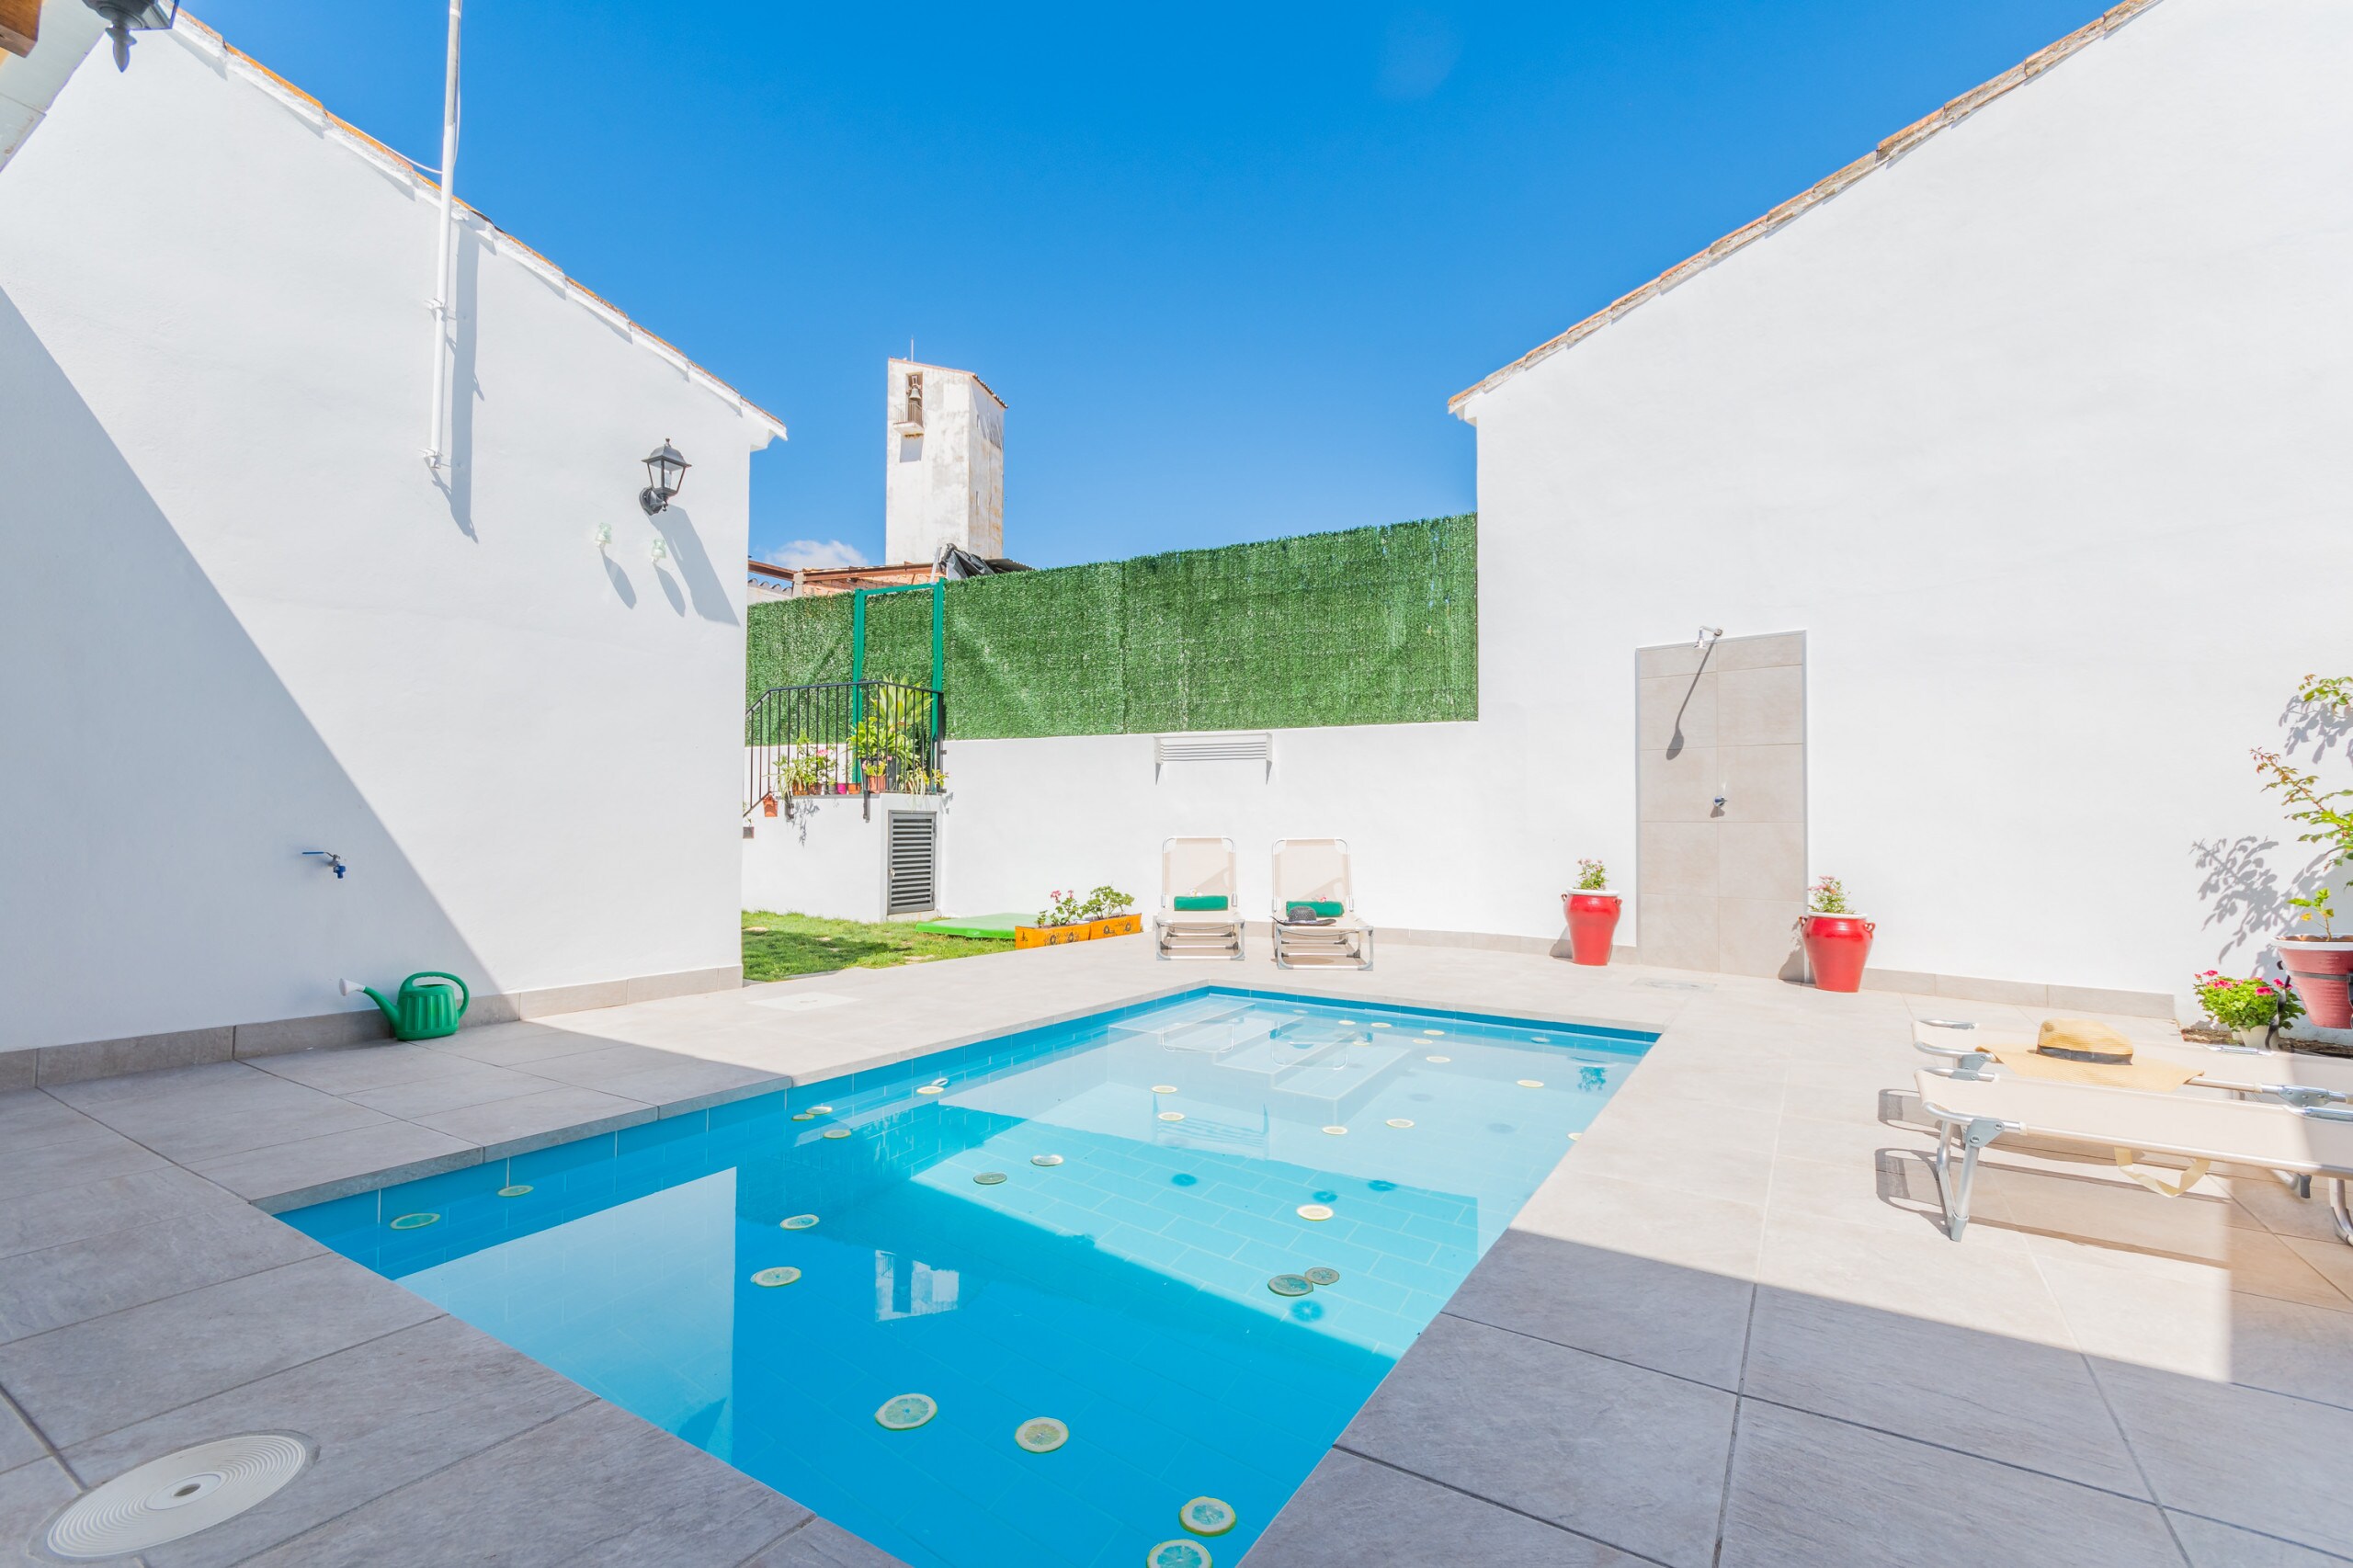 Enjoy the pool of this rural house in Cártama Station